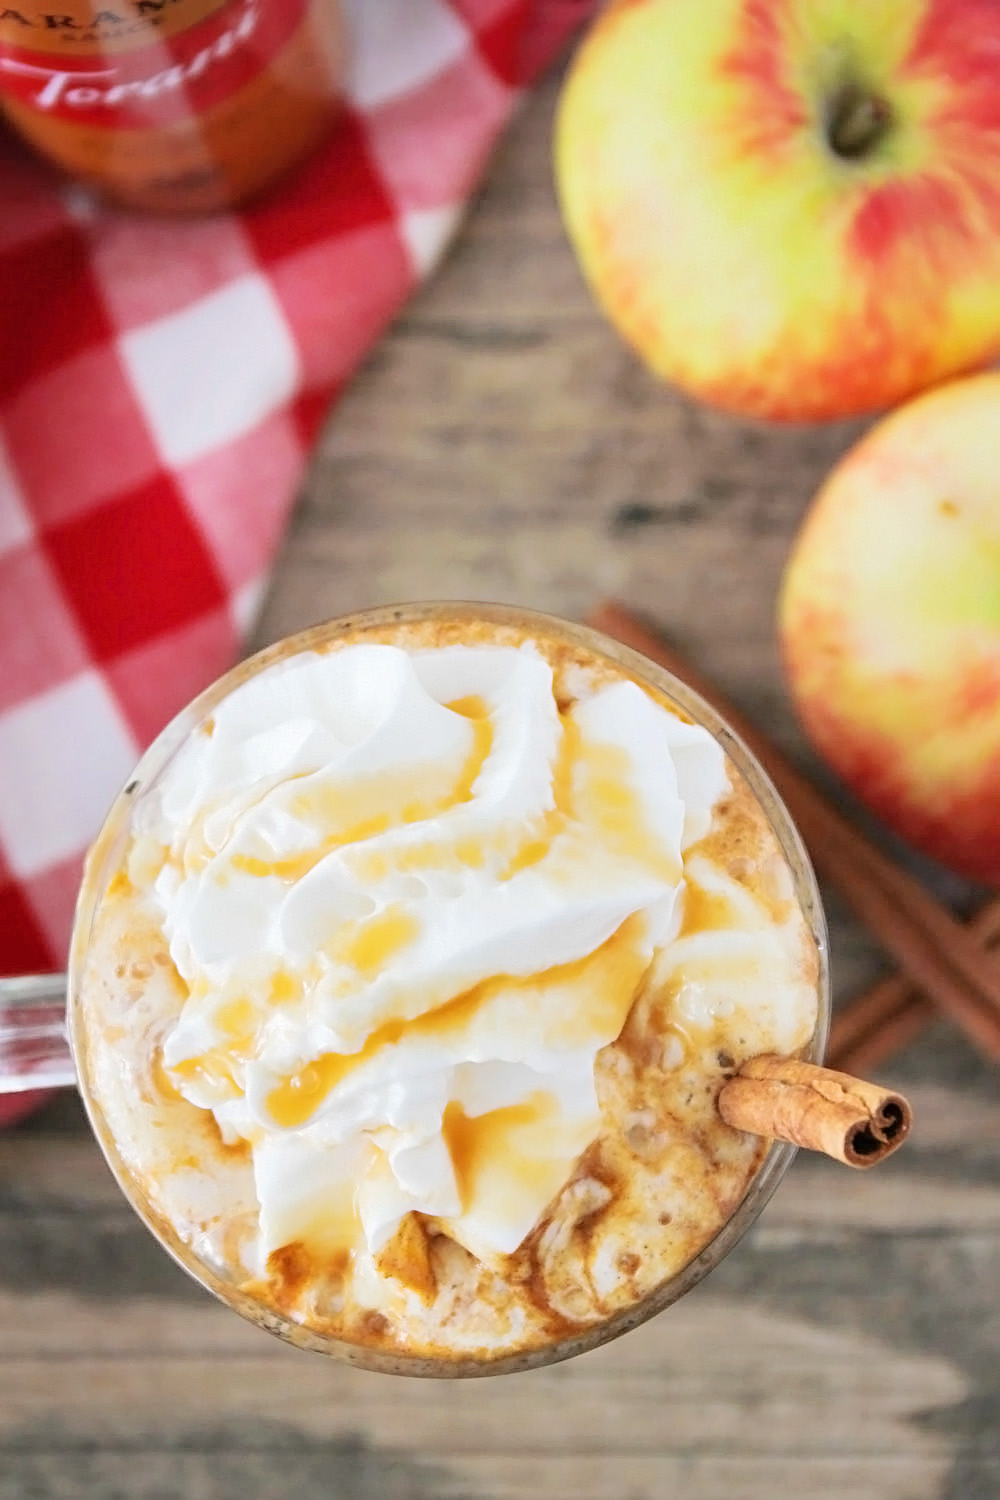 This caramel apple cider is full of delicious fall flavors! The perfect drink to cozy up with this season.